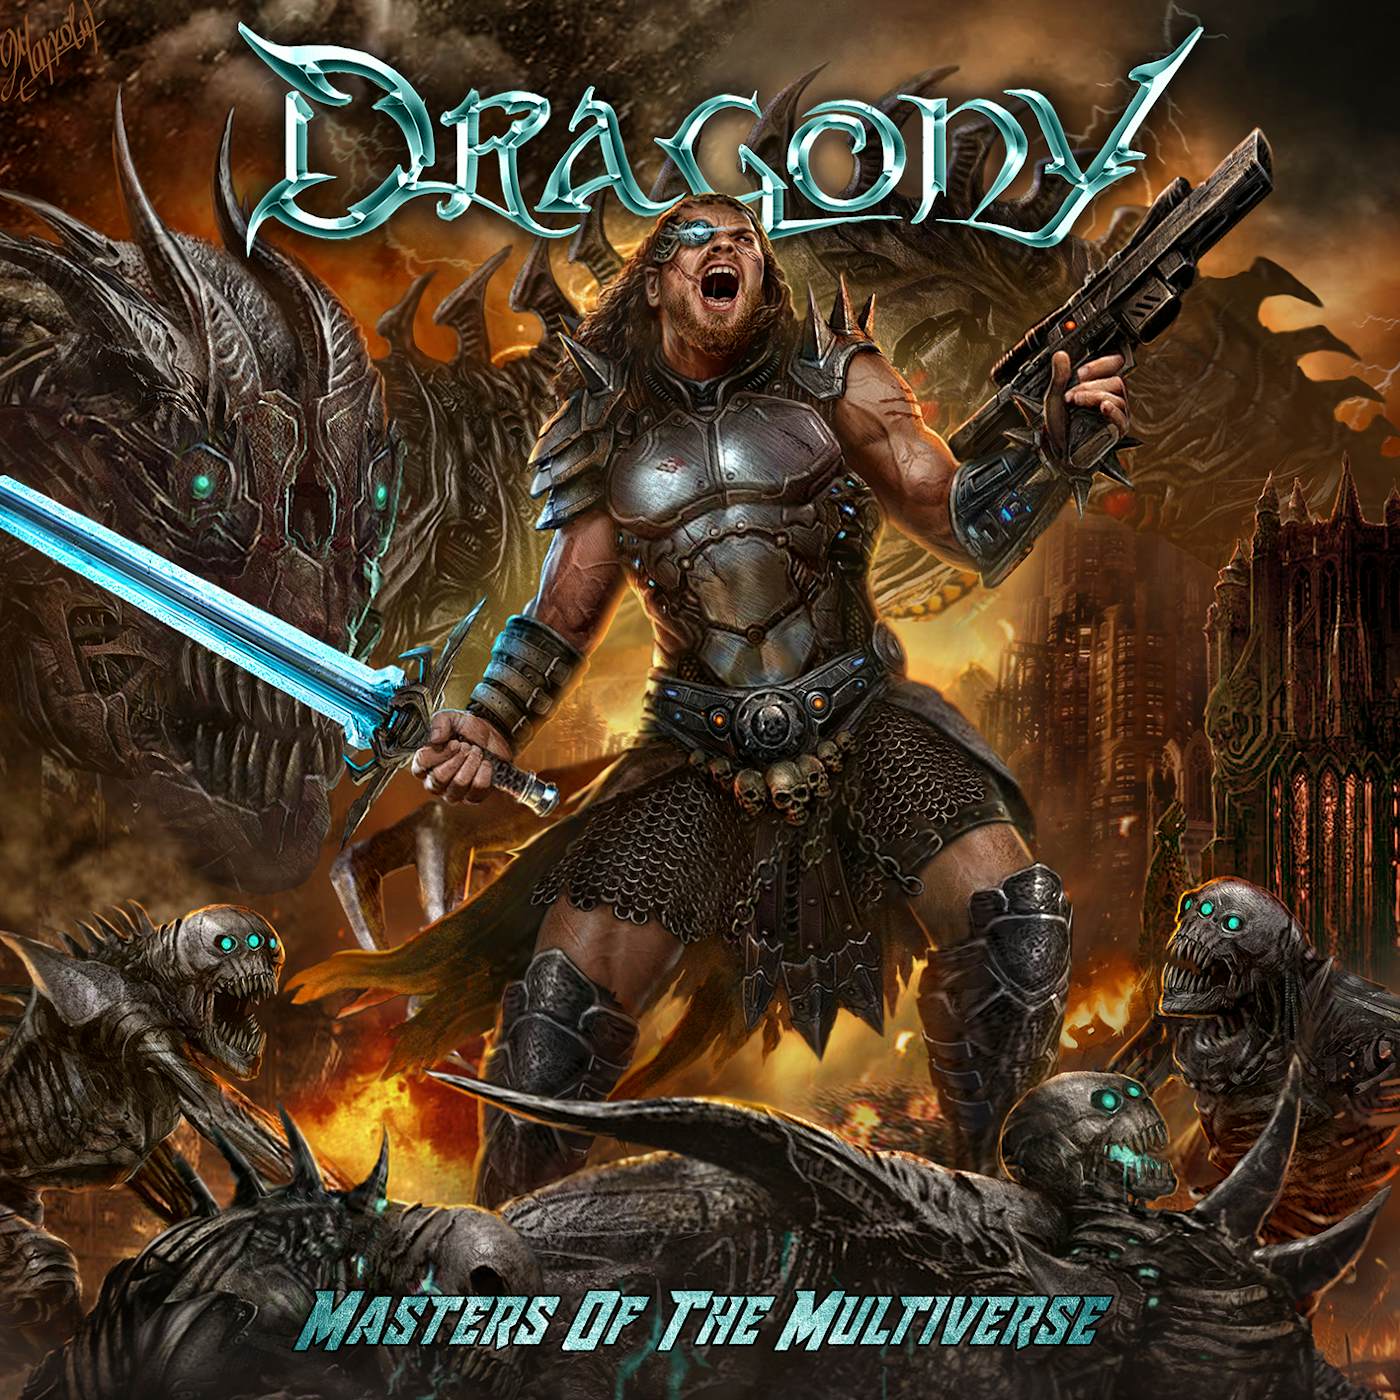 Dragony MASTERS OF THE MULTIVERSE CD